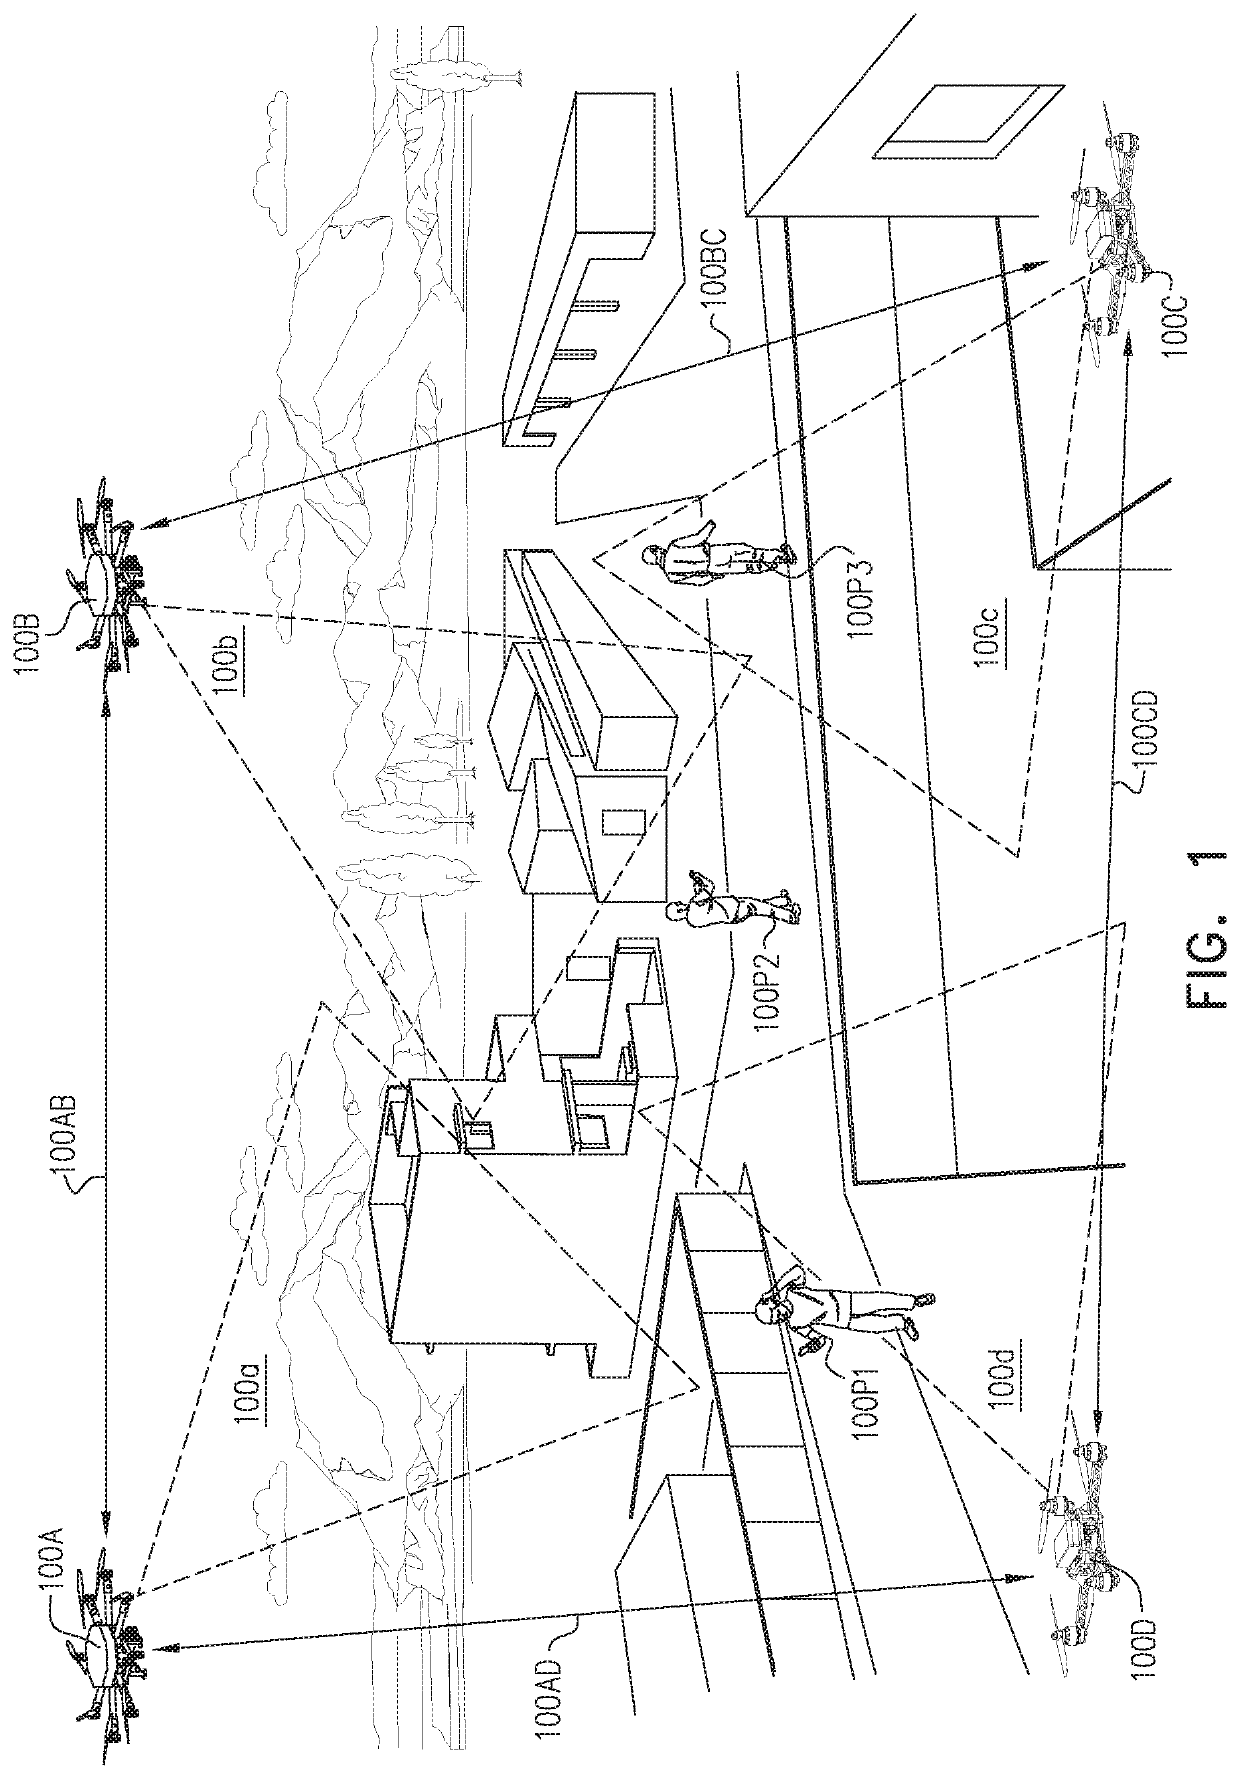 Command and Control Systems and Methods for Distributed Assets